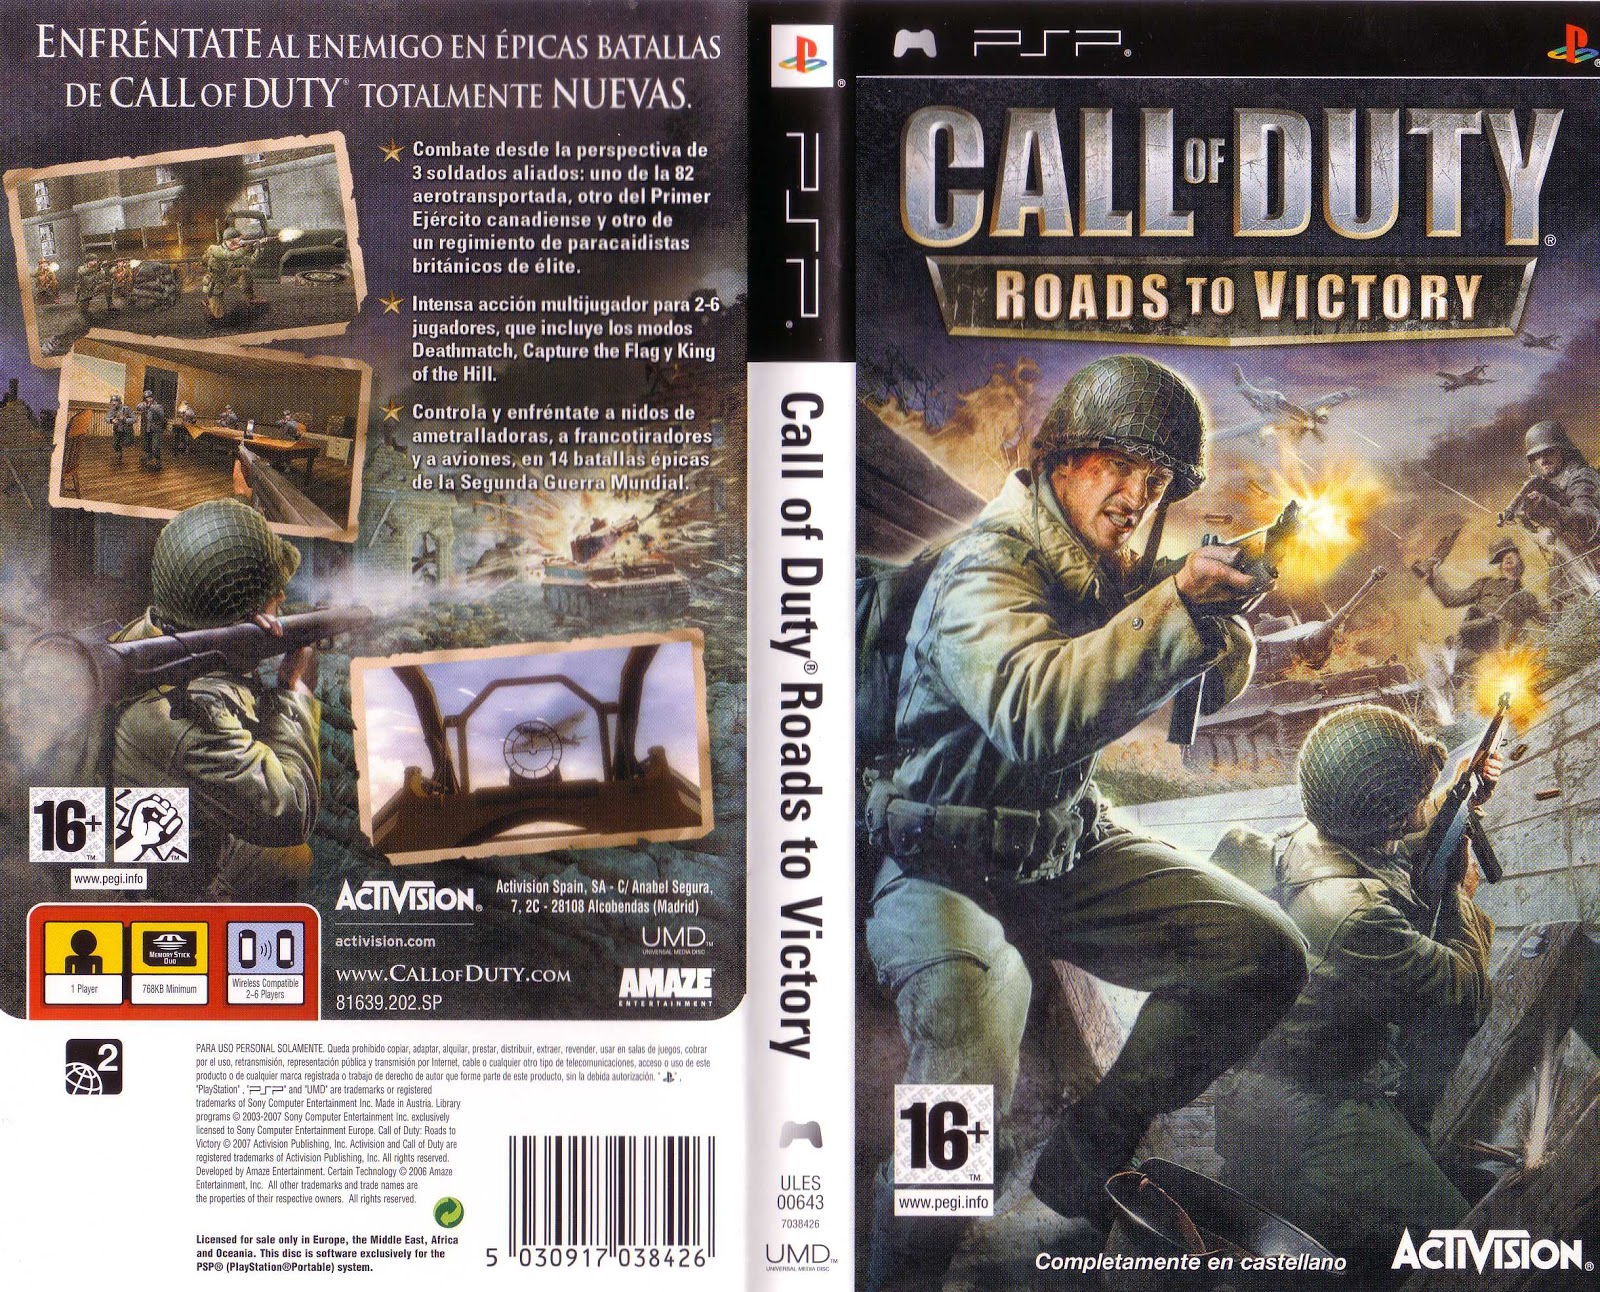 Download Call of Duty Roads to Victory.cso For PSP ~ Games For PSP ...